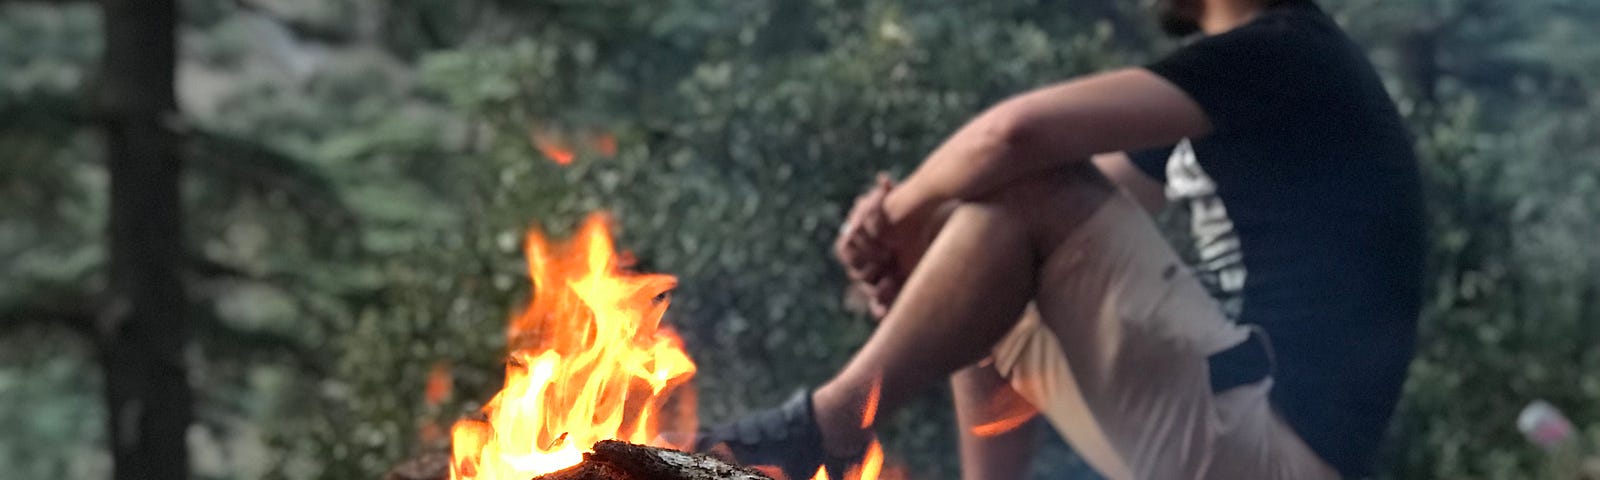 A man sitting next to fire in the forest